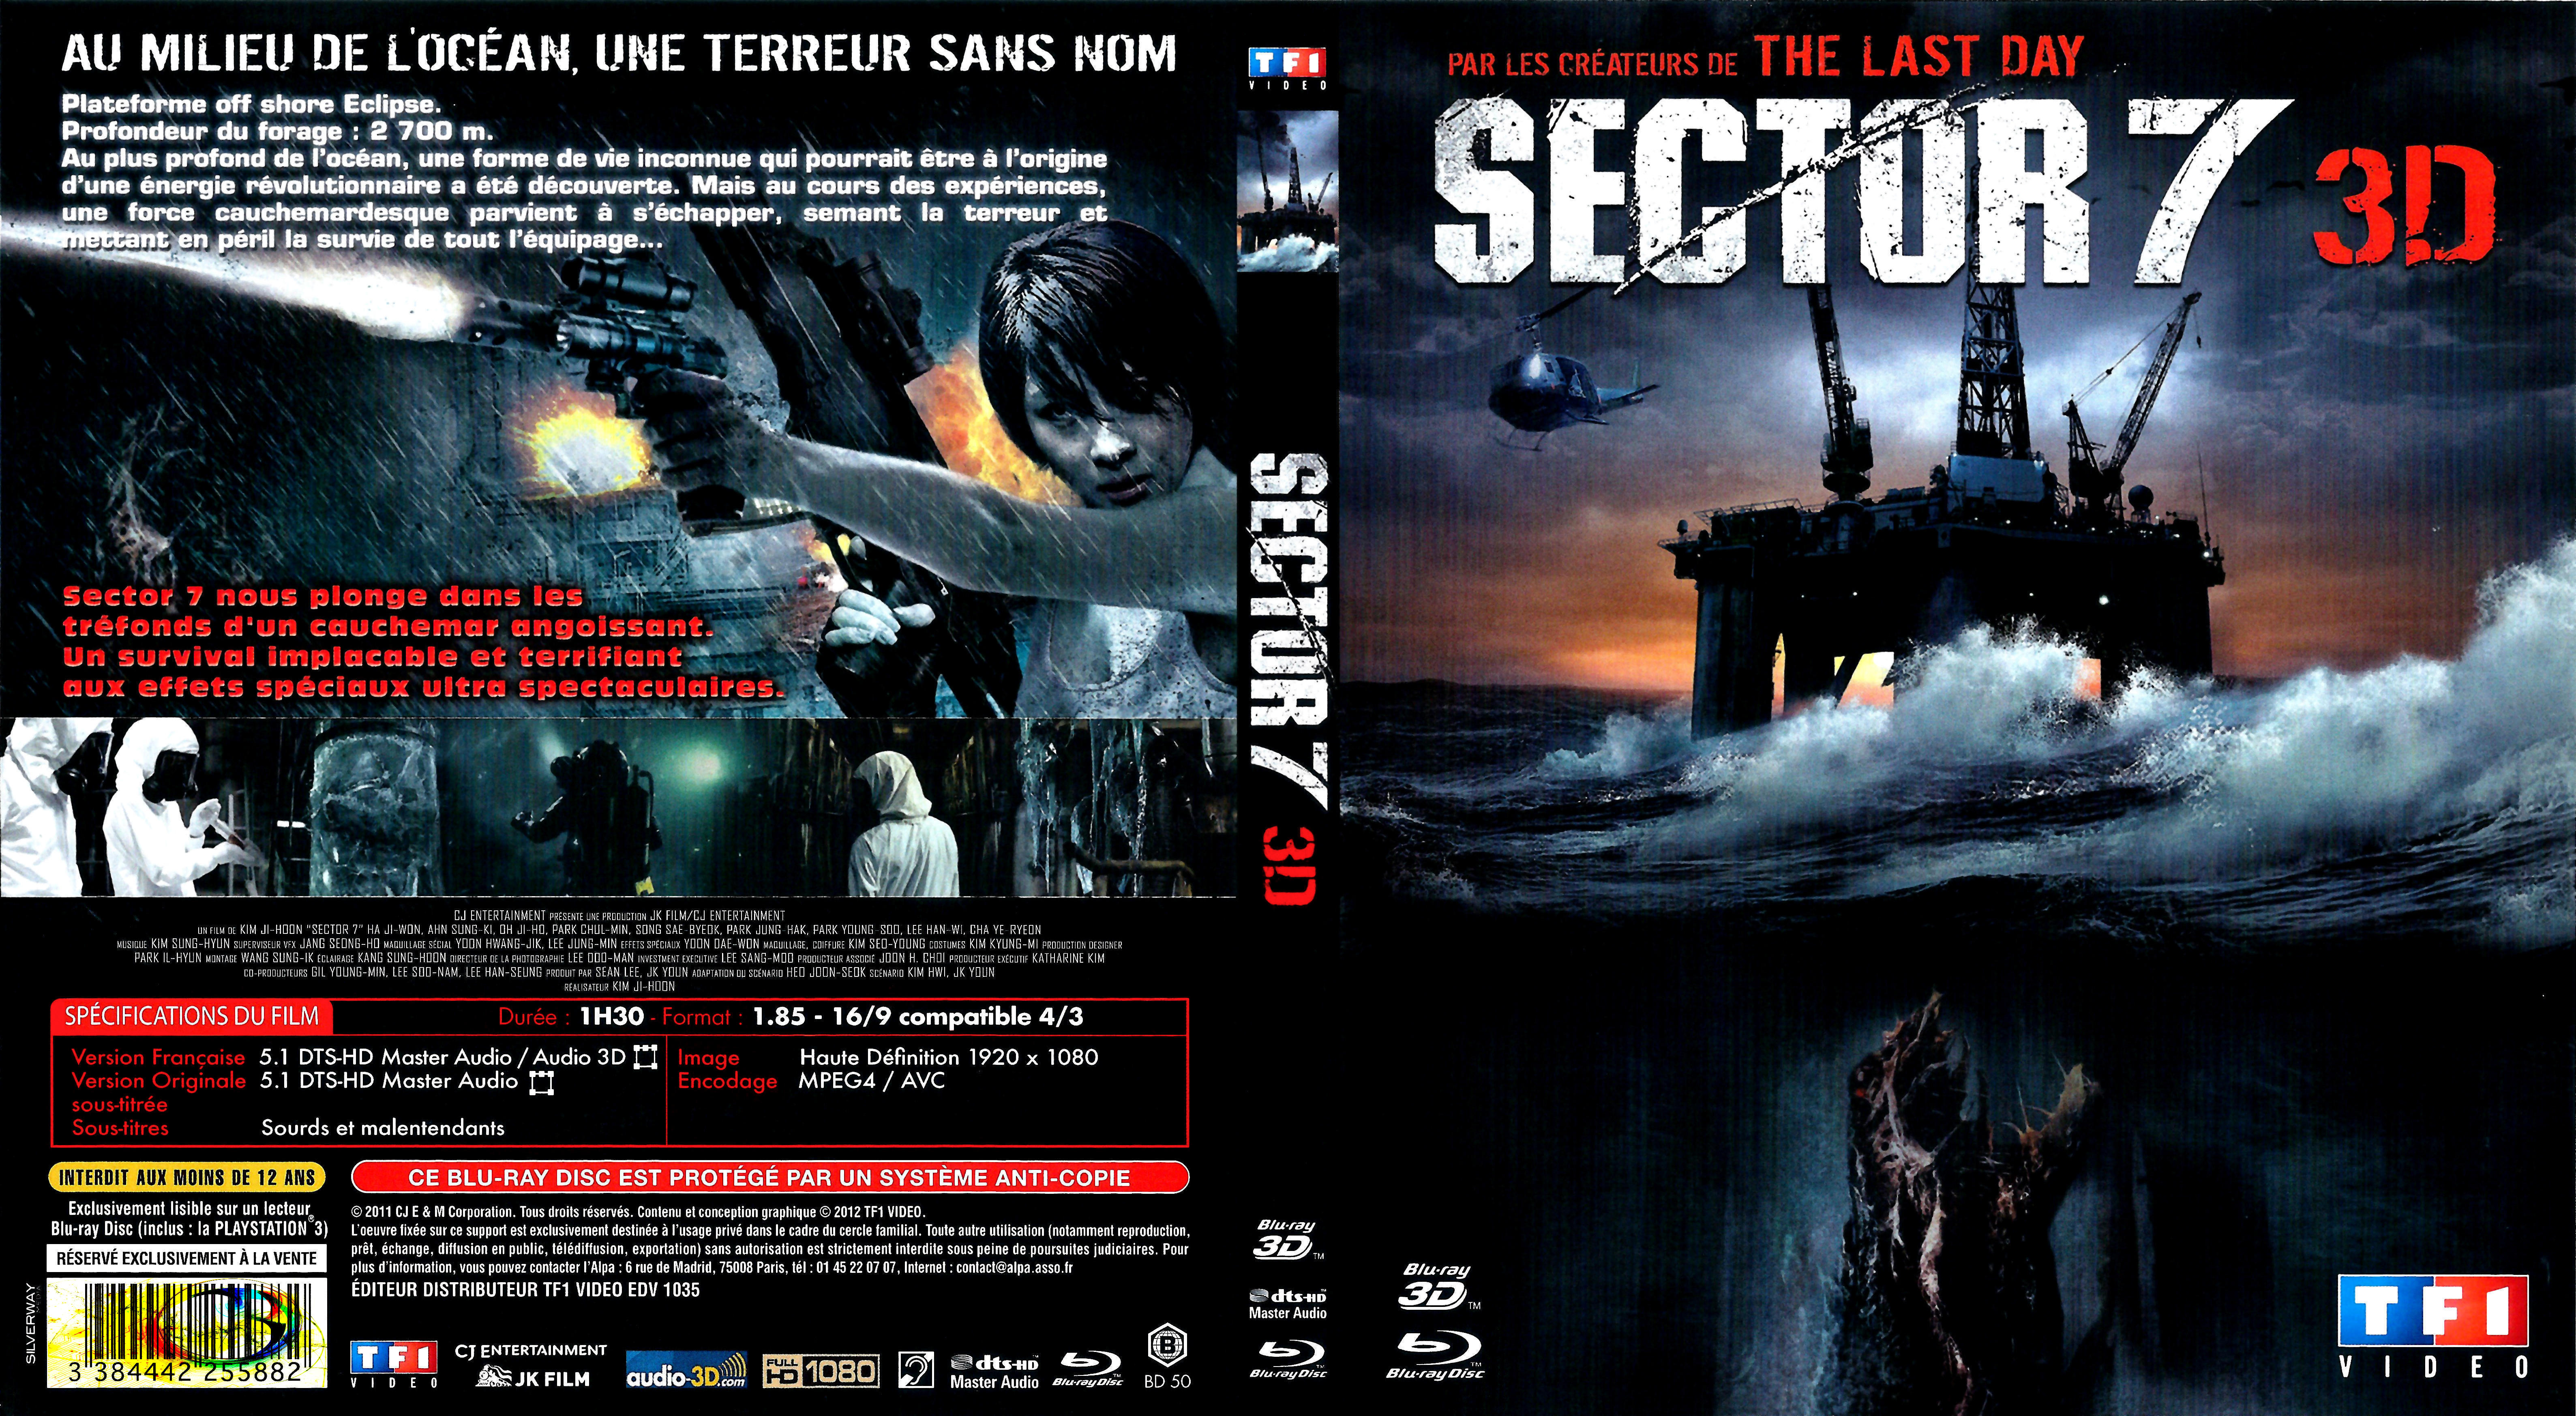 Jaquette DVD Sector 7 3D (BLU-RAY)